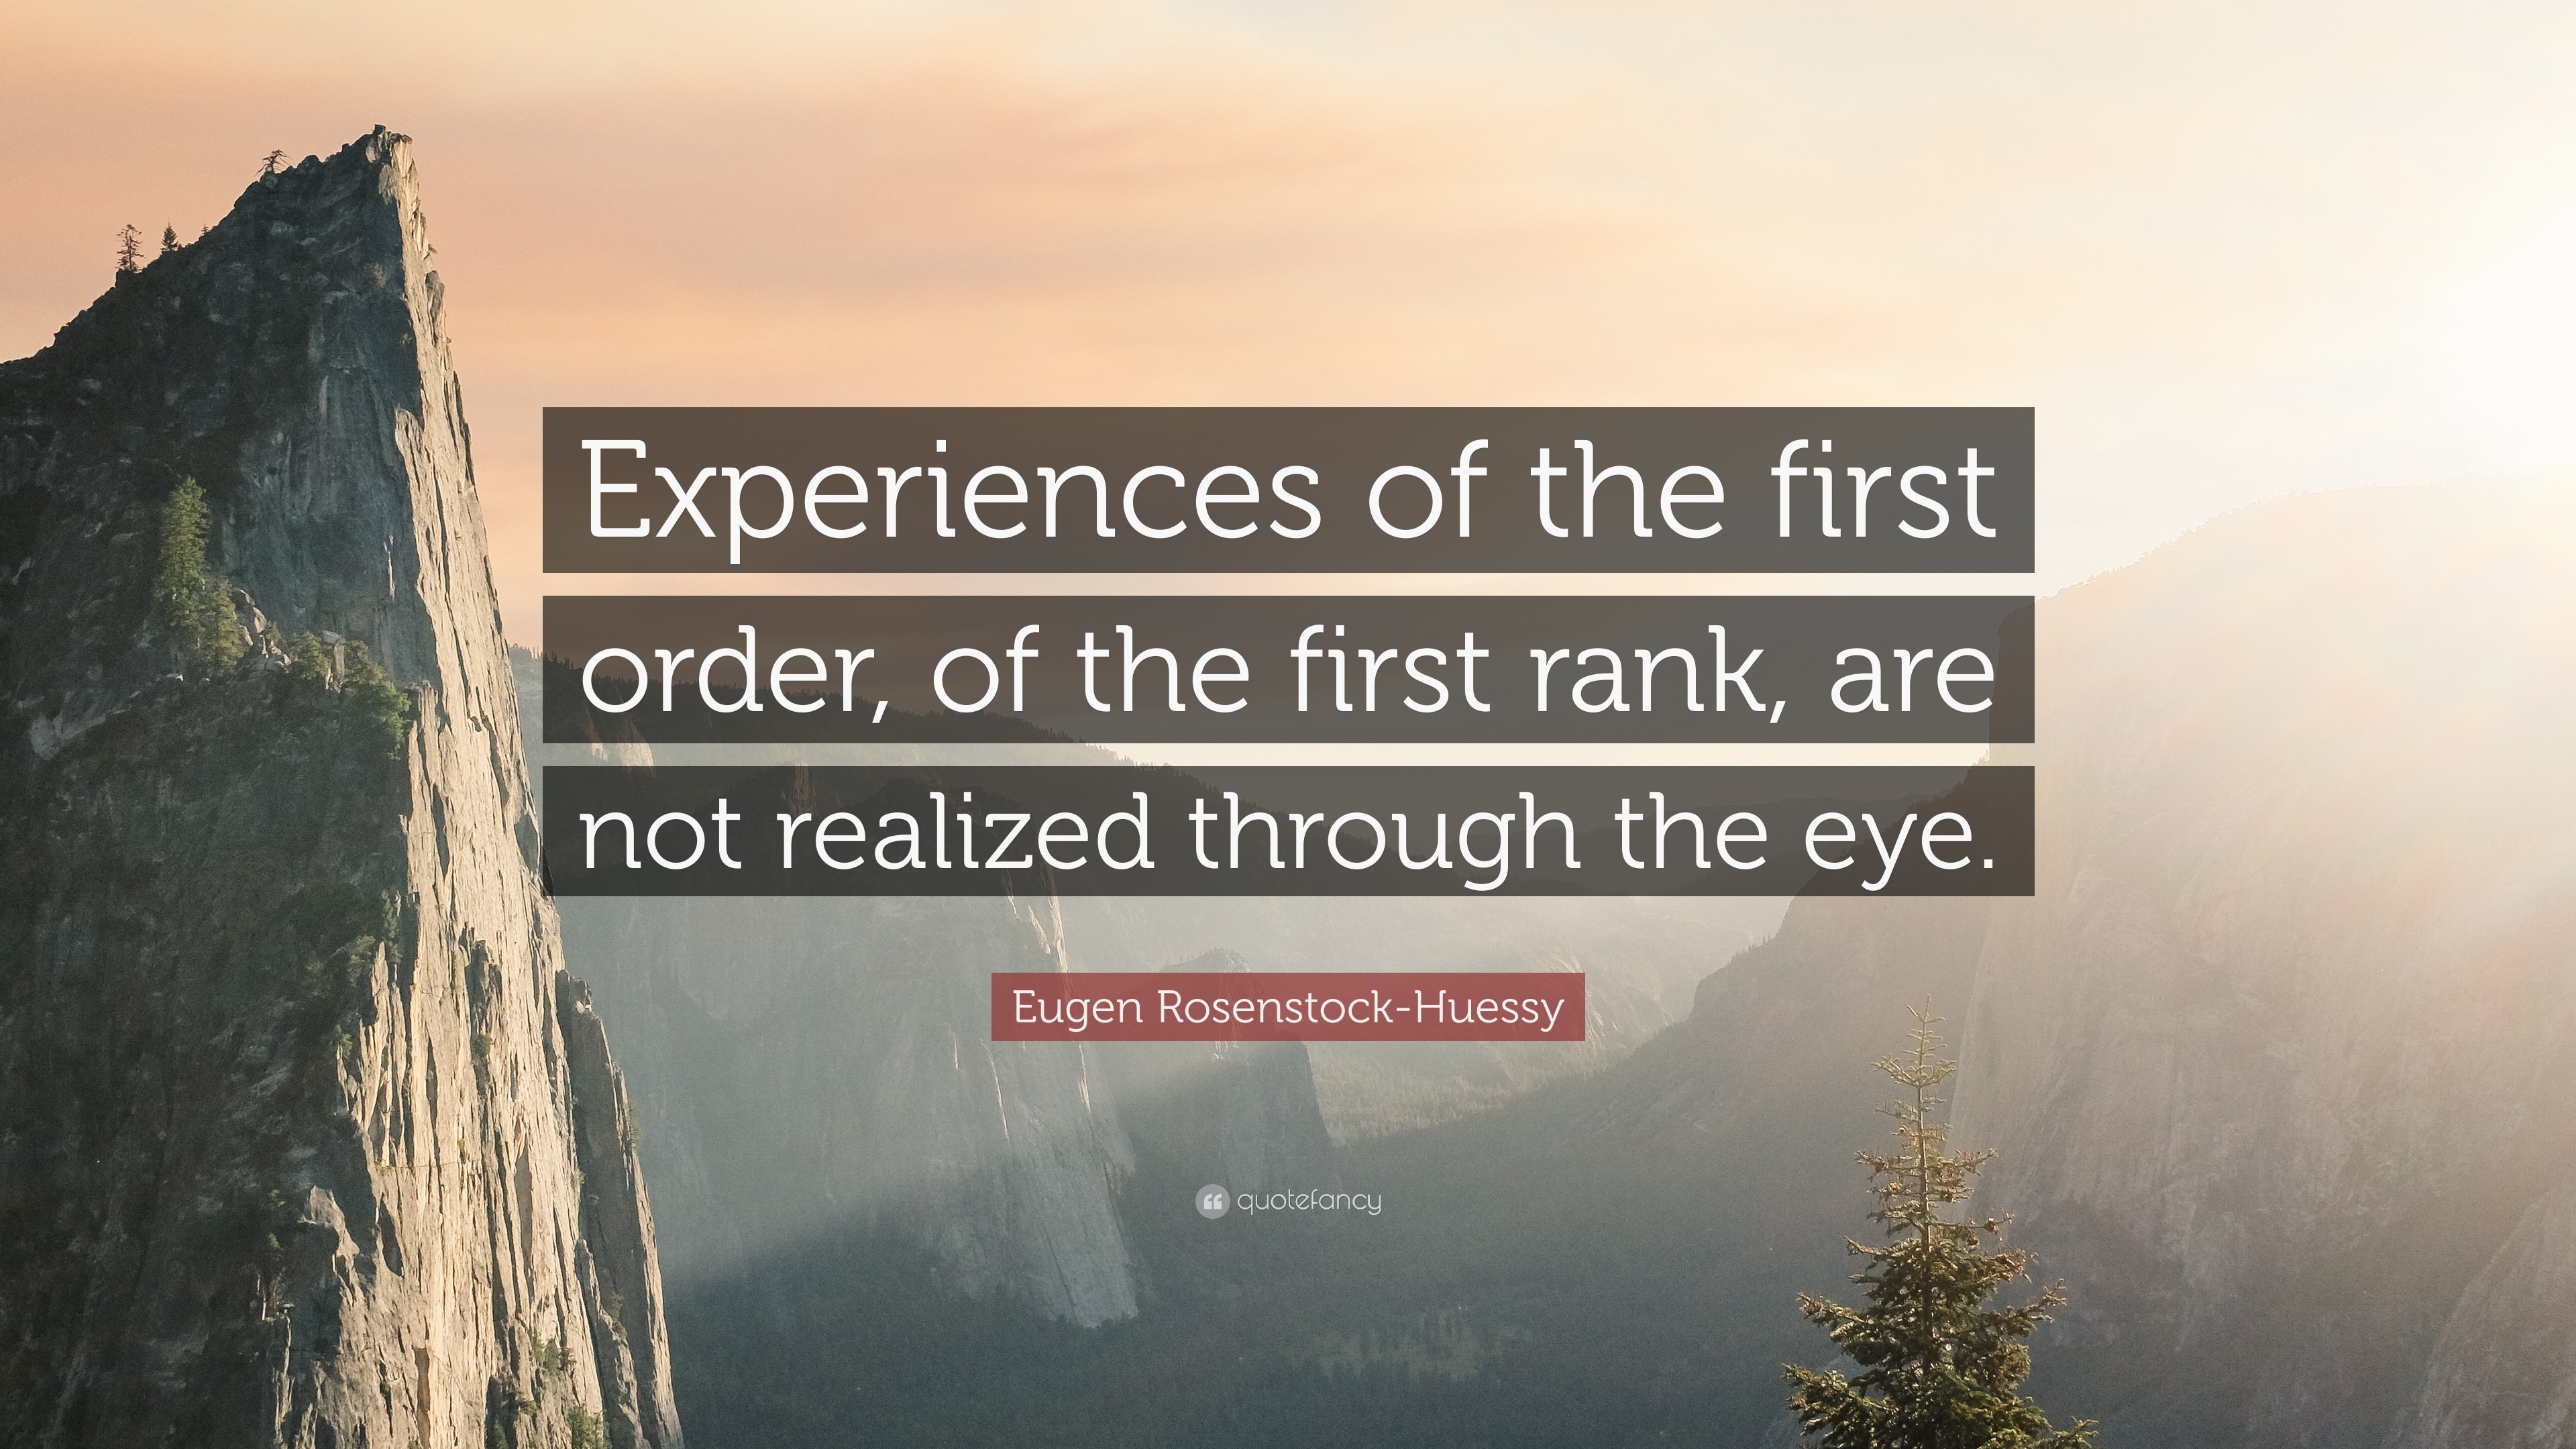 3840x2160 Eugen Rosenstock-Huessy Quote: “Experiences of the first order, of the first